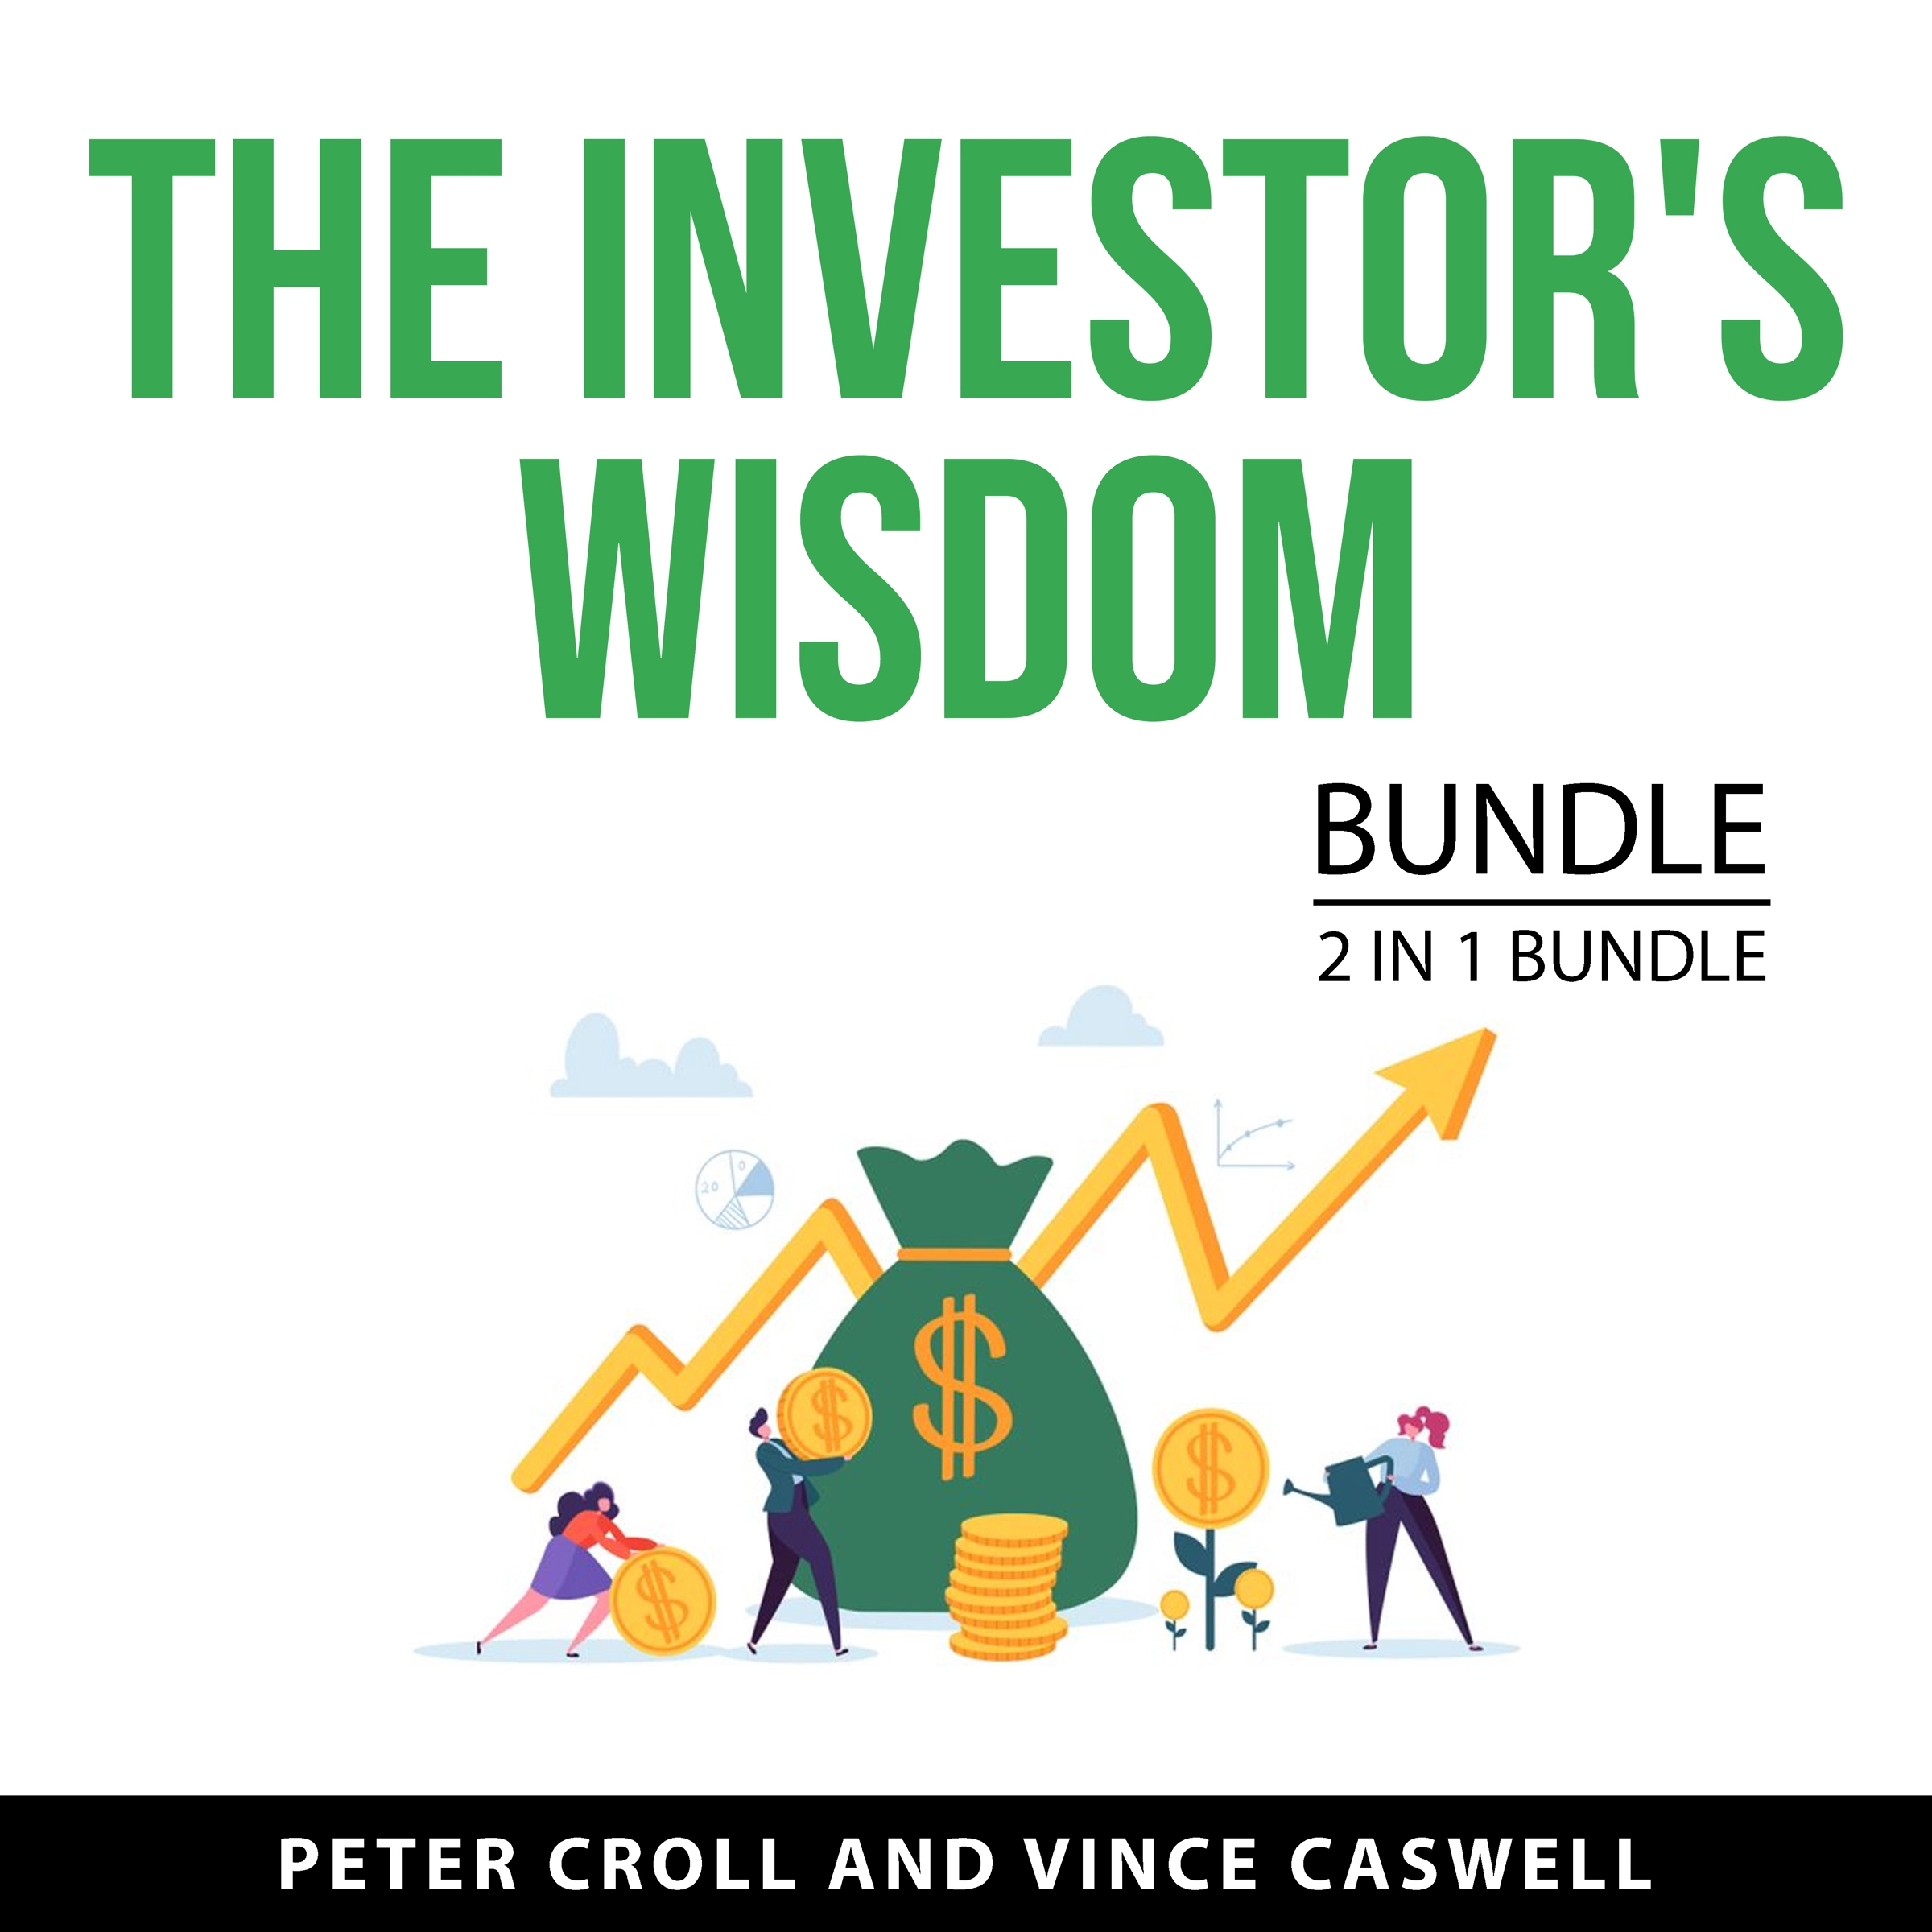 The Investor's Wisdom Bundle, 2 in 1 Bundle by Vince Caswell Audiobook